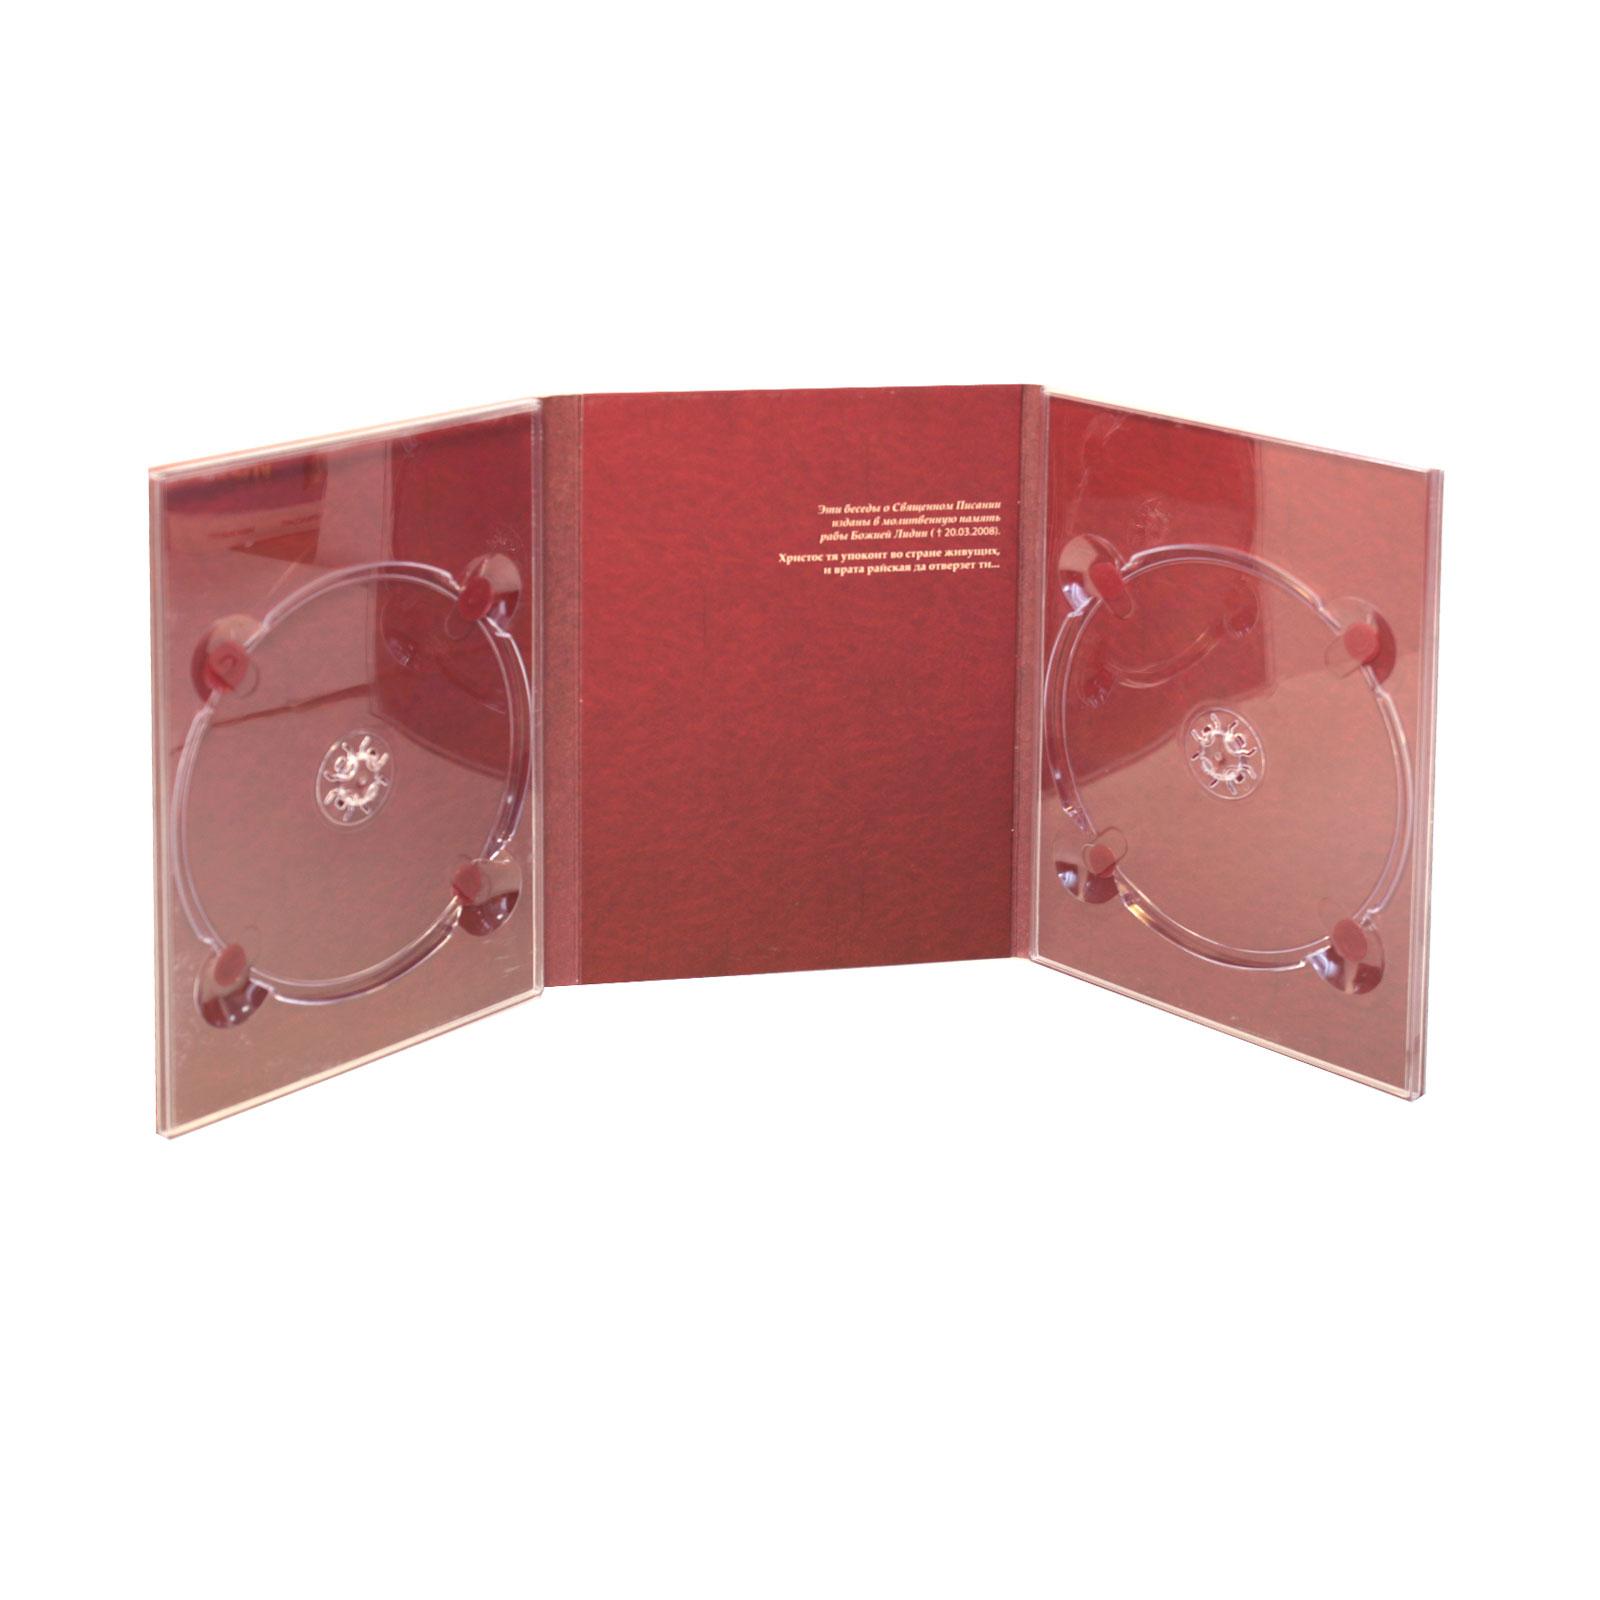 digisleeve 2 cd with 12pp bookletdigisleeve 2 cd replication with 12pp booklet</a>Potential buyer <a href=